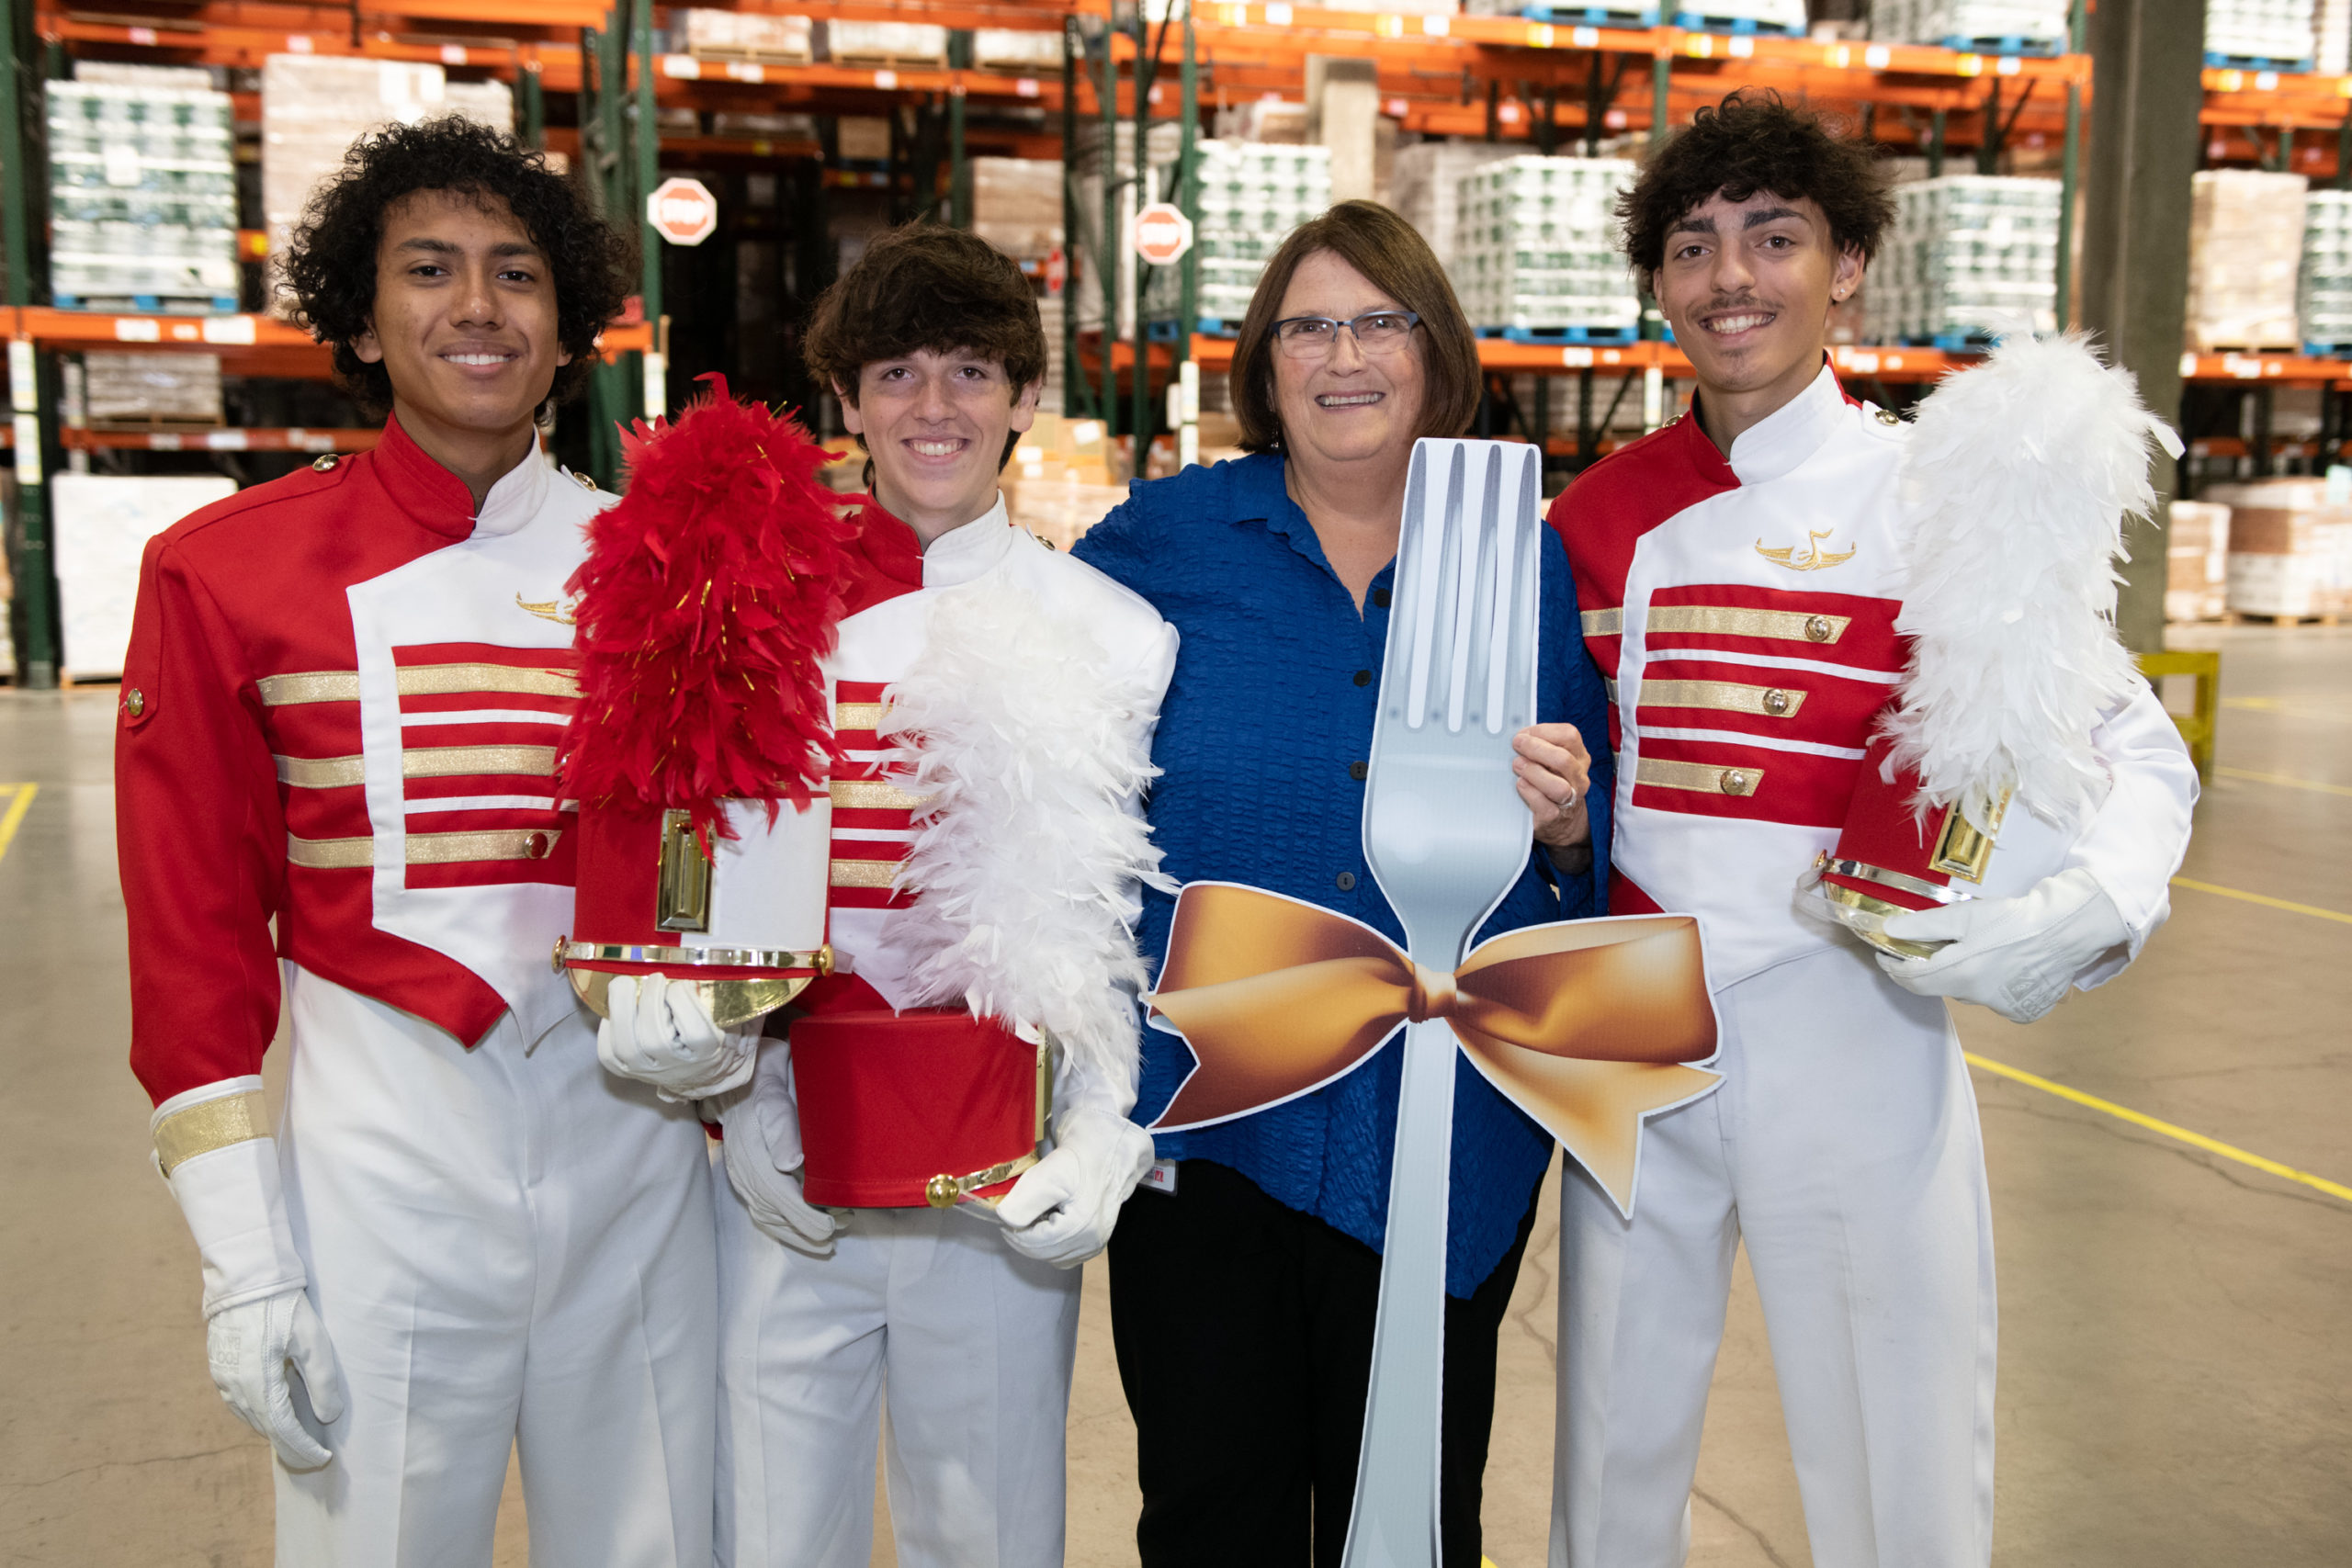 Members of the Everett High School Crimson Tide Marching Band, recipients of this year's Nally Award, with Catherine D'Amato